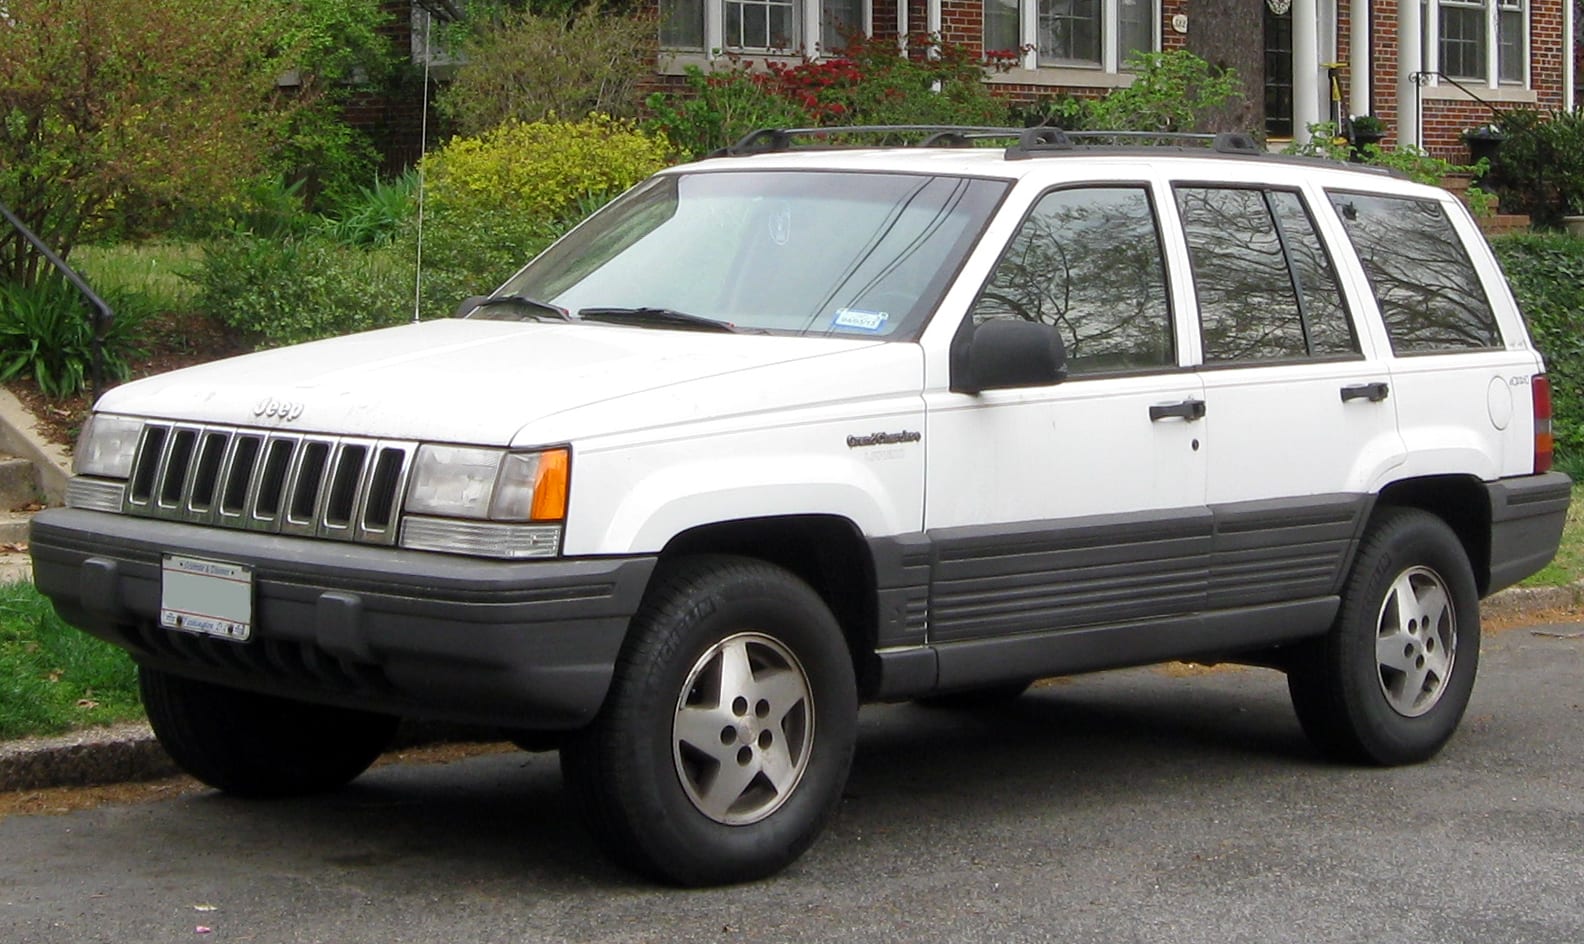 Which Generation of the Jeep Grand Cherokee Should I Opt